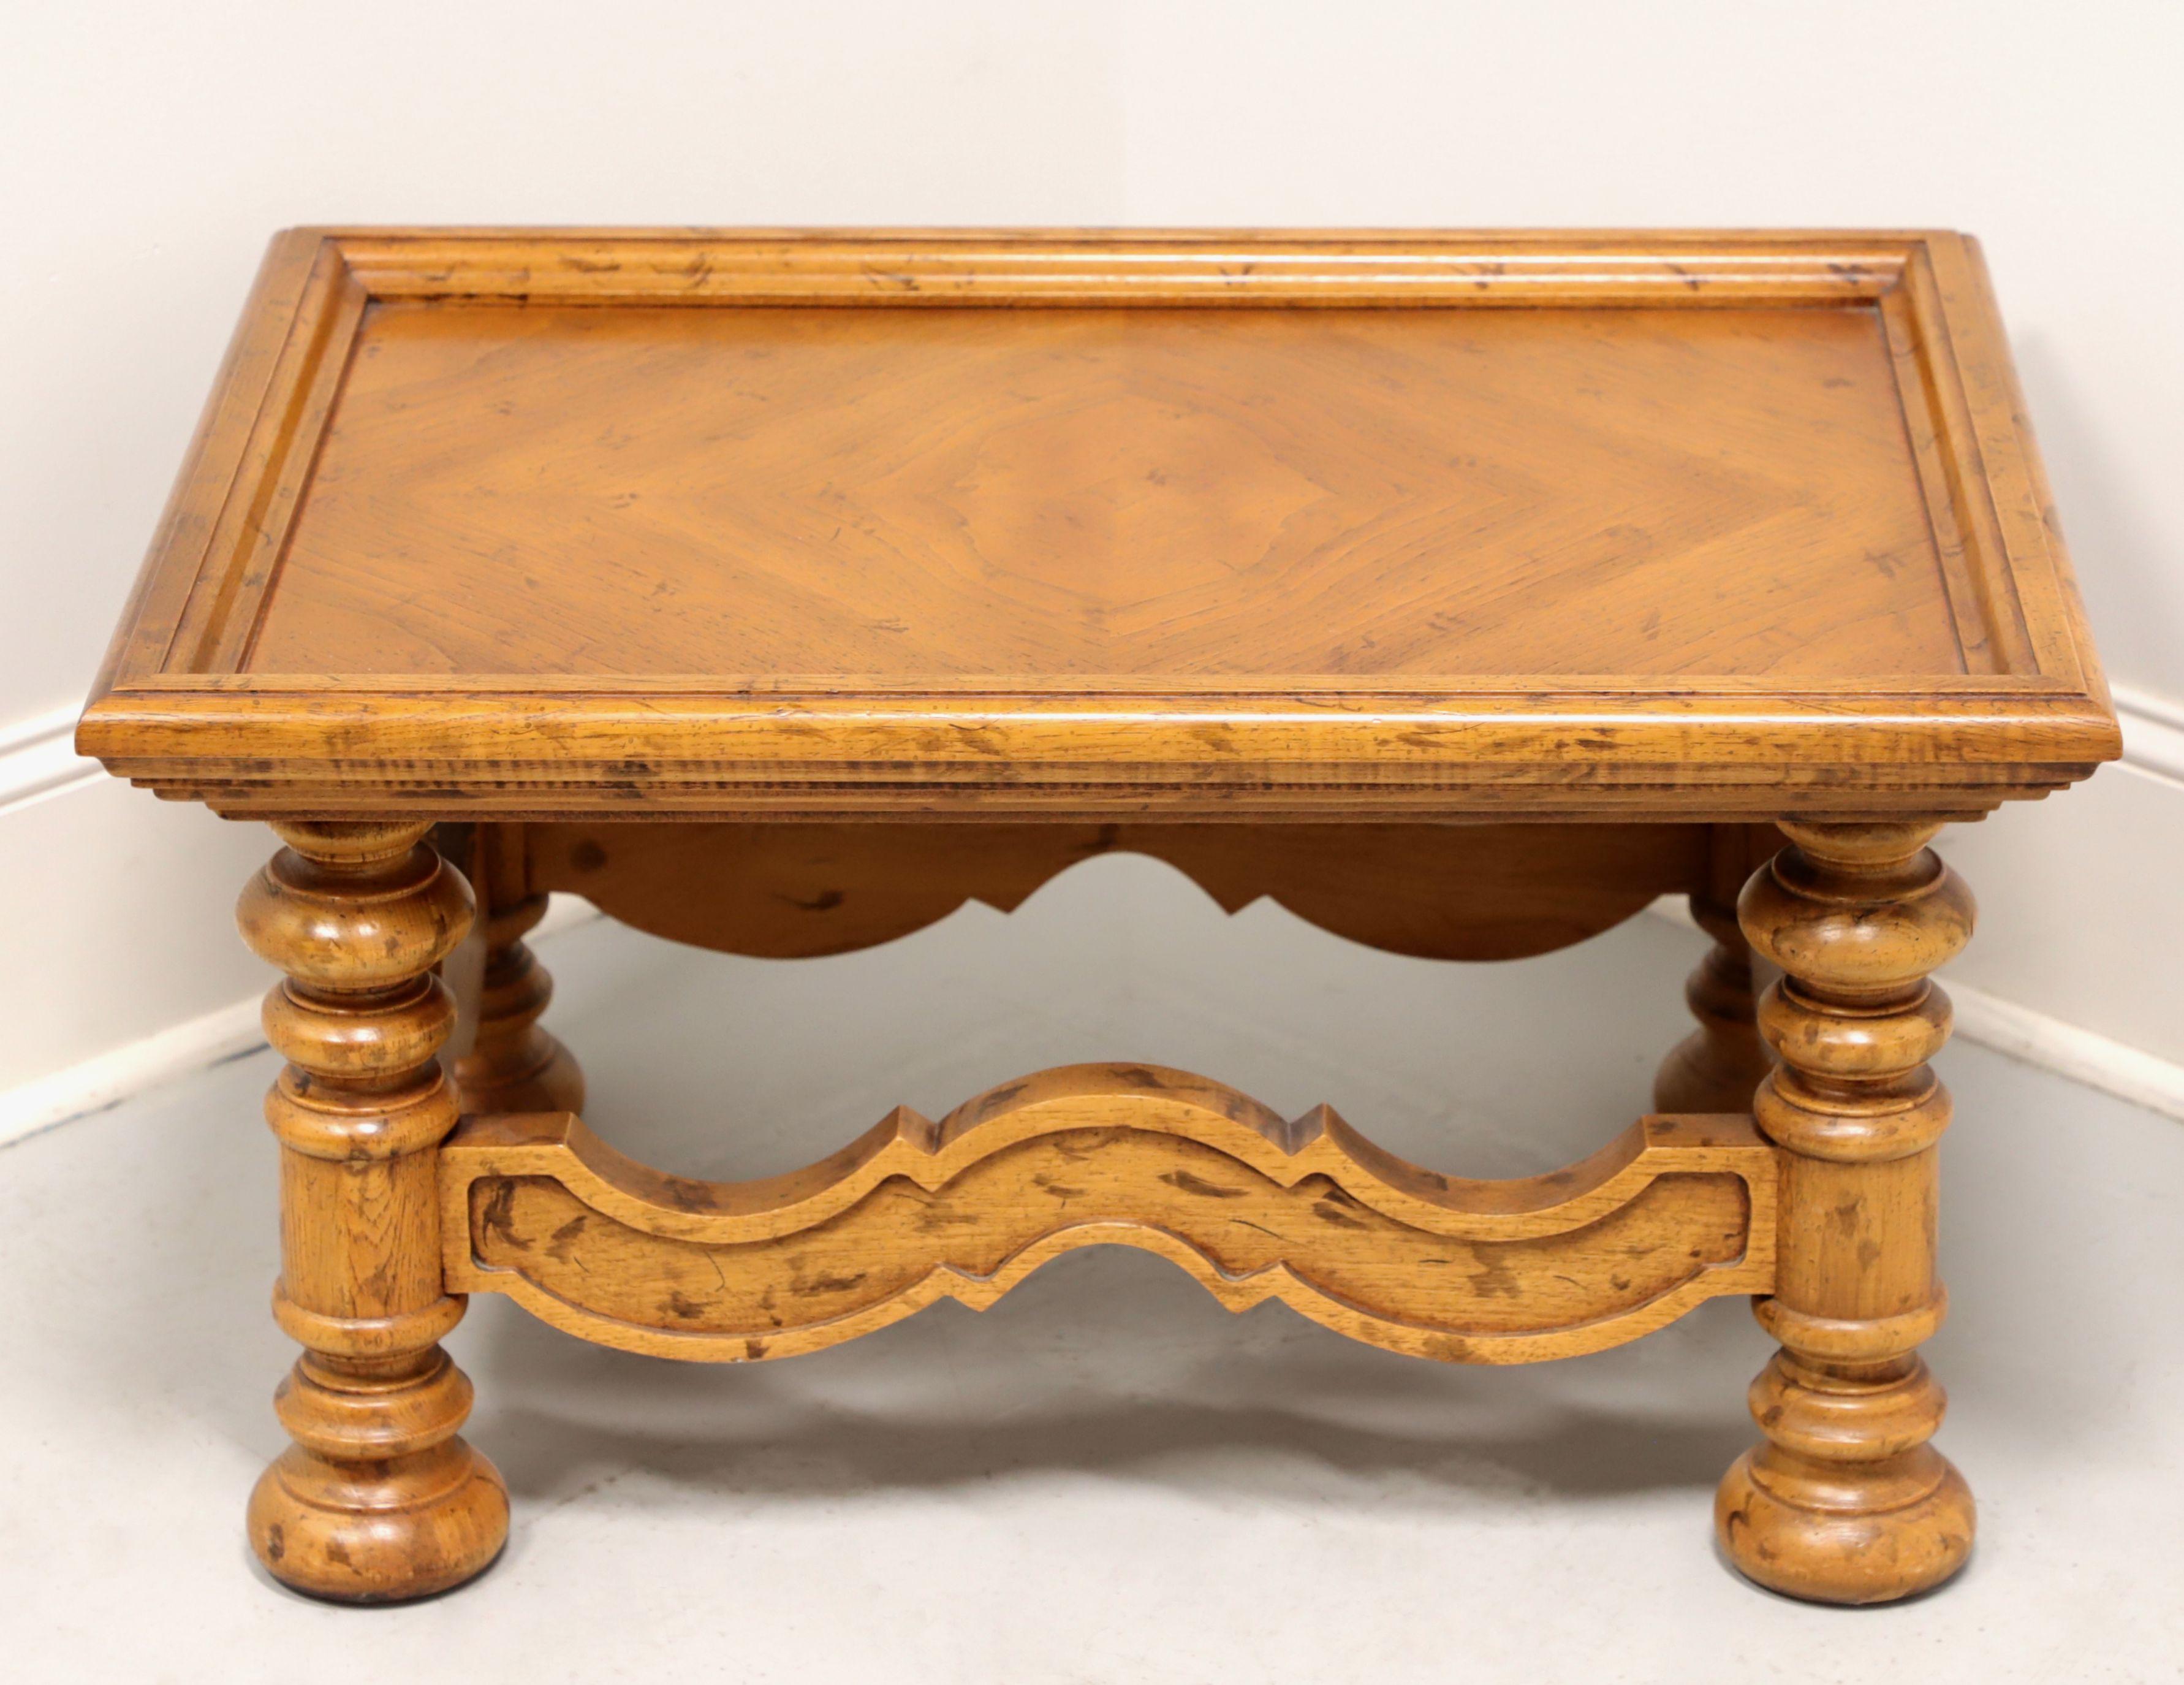 A Spanish style rectangular coffee table by Drexel, from their Velero Collection. Pecan with distressed finish, parquetry tray top, decoratively carved stretchers and turned legs. Made in North Carolina, USA, circa 1969. 

Style #: